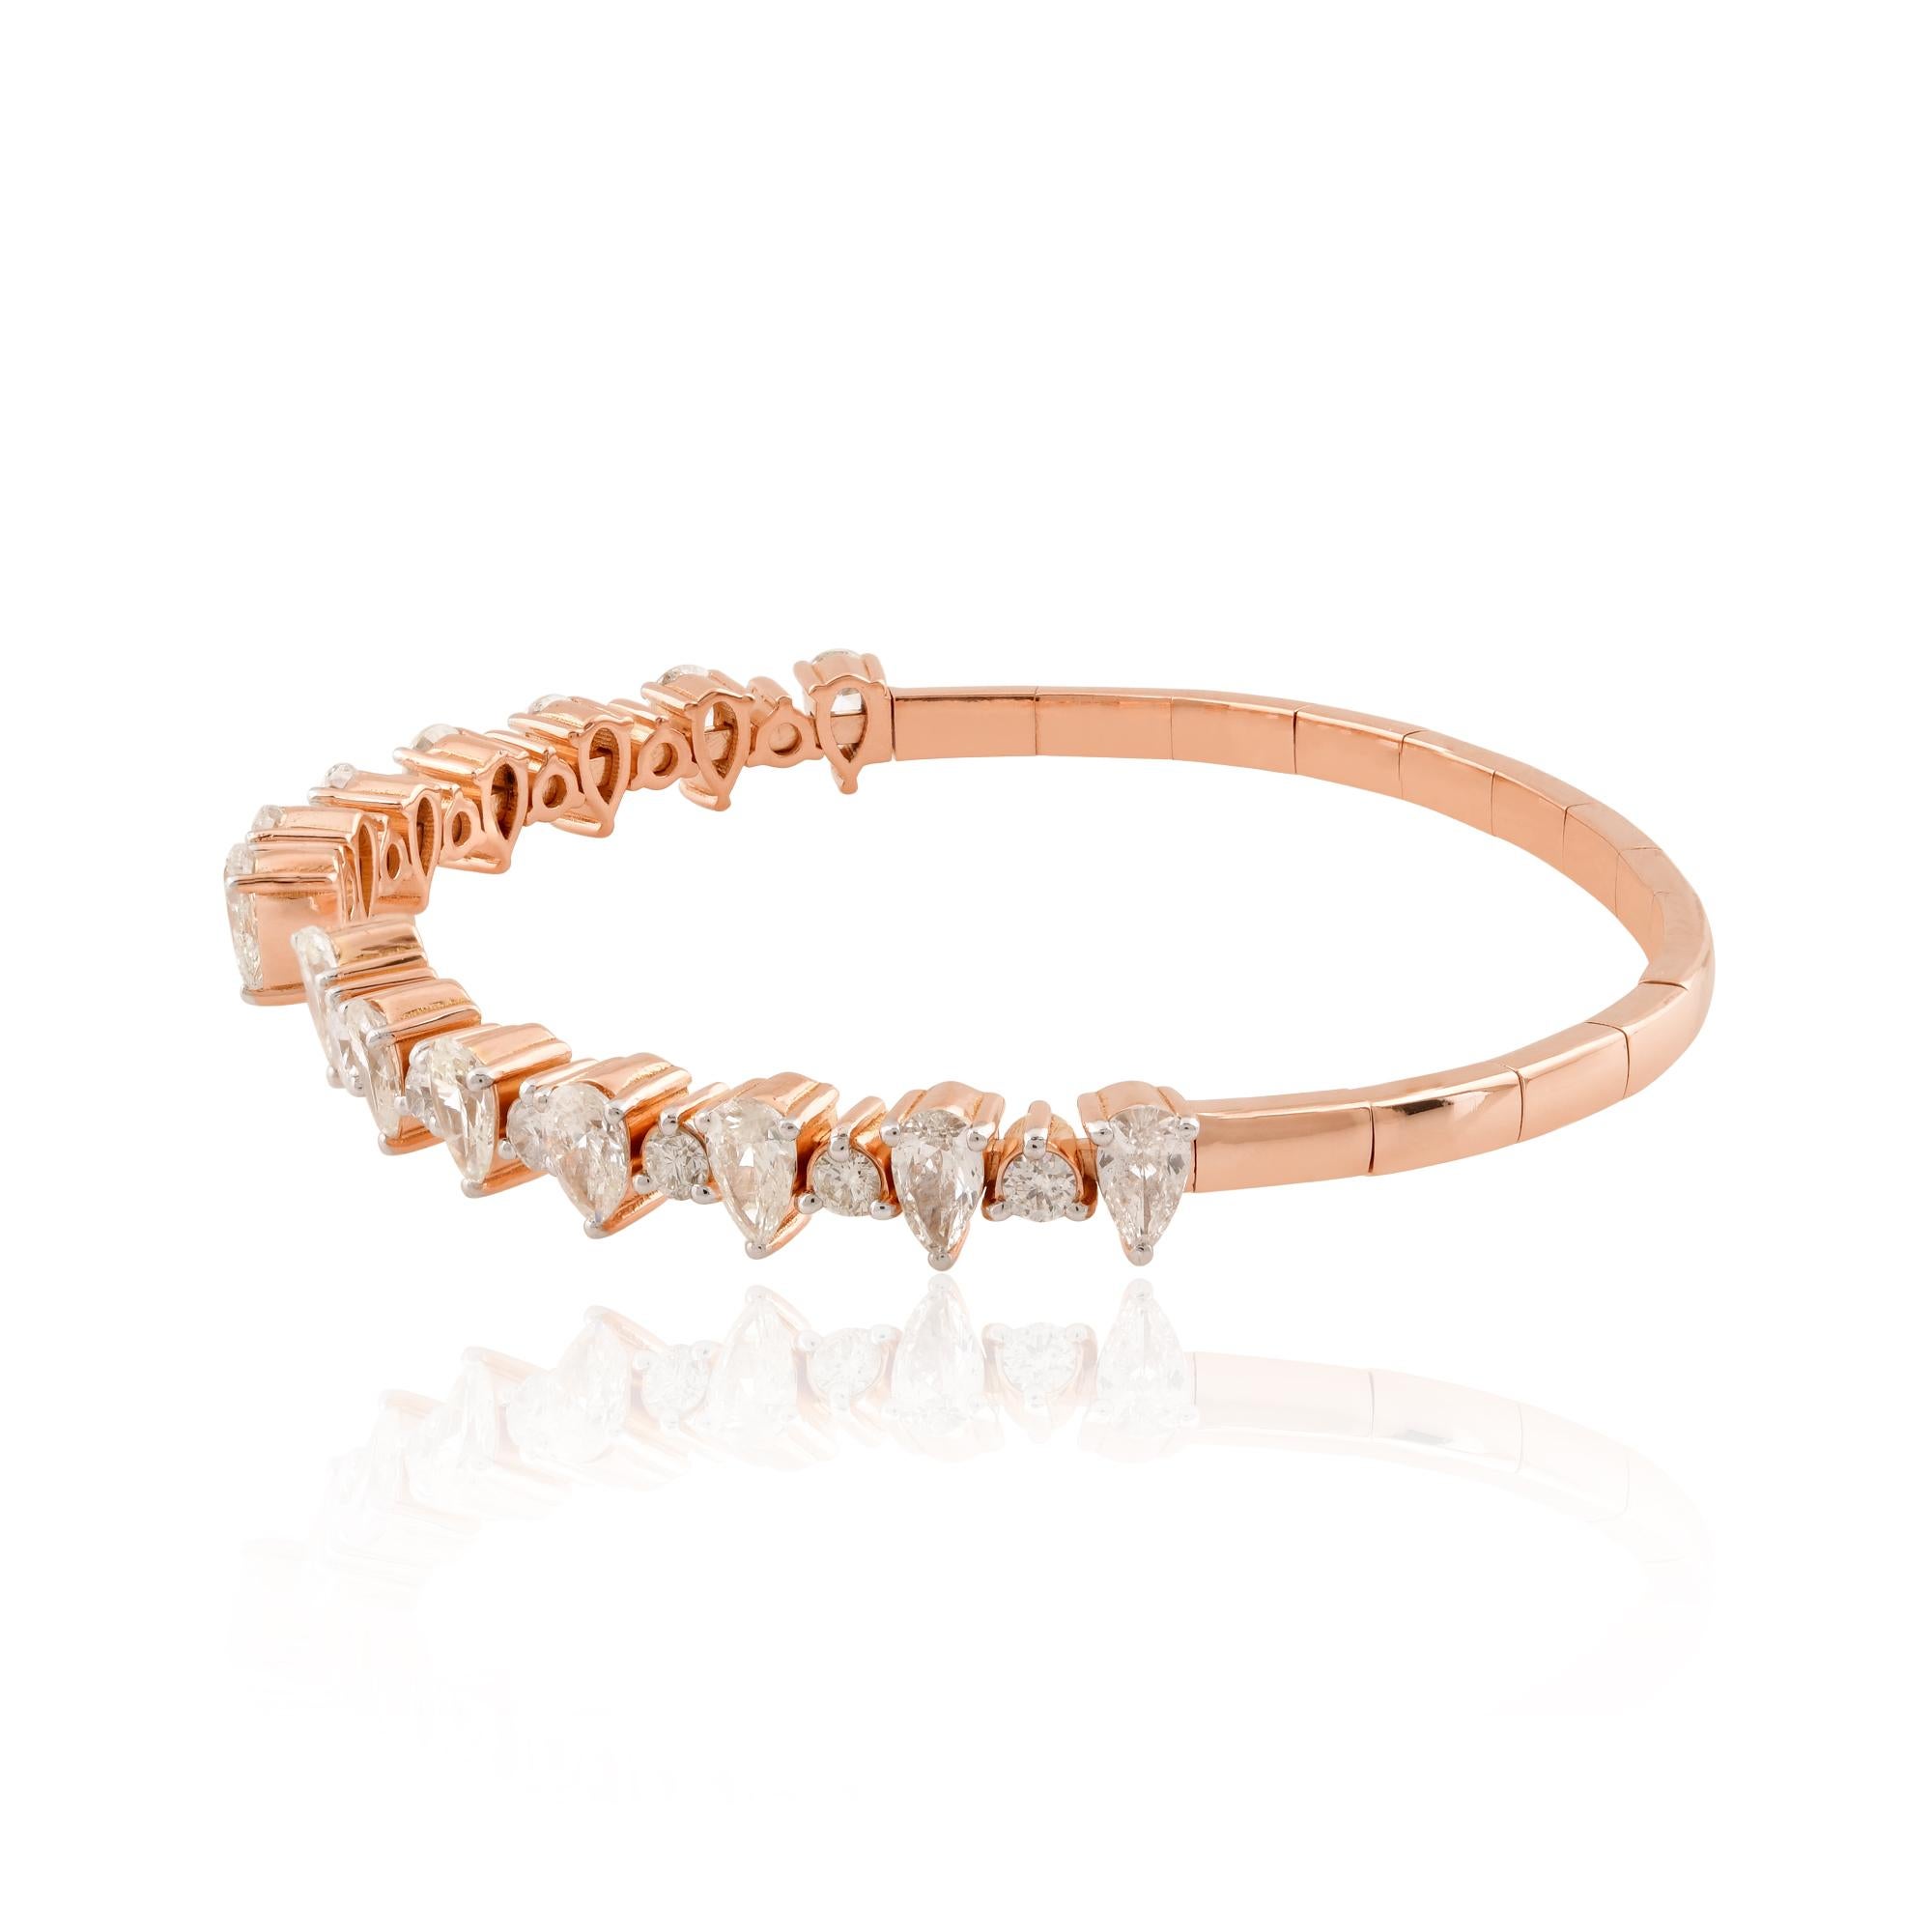 Every facet of this bangle bracelet has been meticulously crafted to perfection, from the smooth, polished finish of the gold to the secure setting of the diamond. The open cuff design not only adds a modern twist to the classic silhouette but also